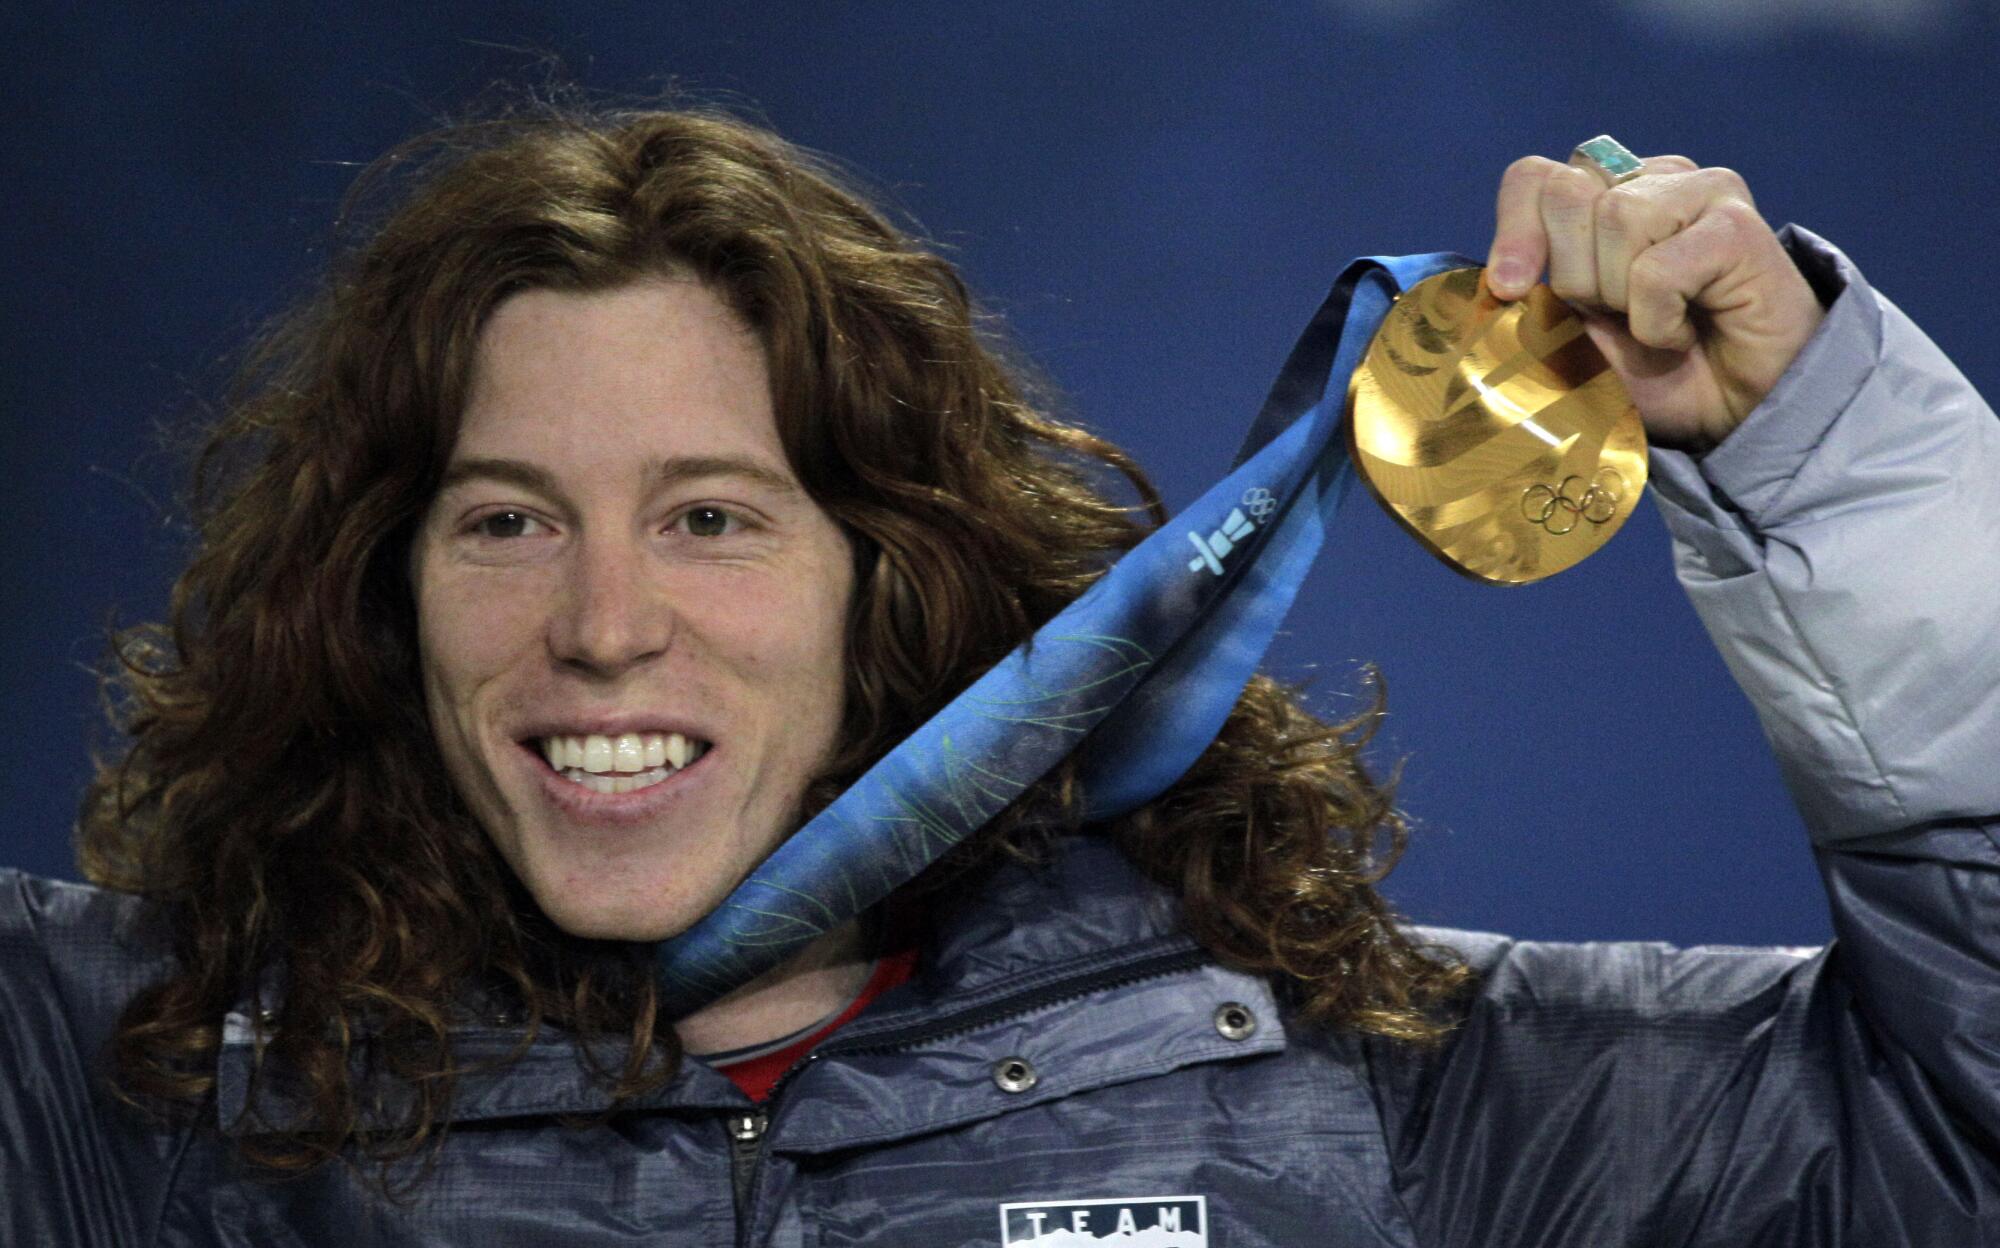 Shaun White holds a gold medal at the 2010 Olympics.